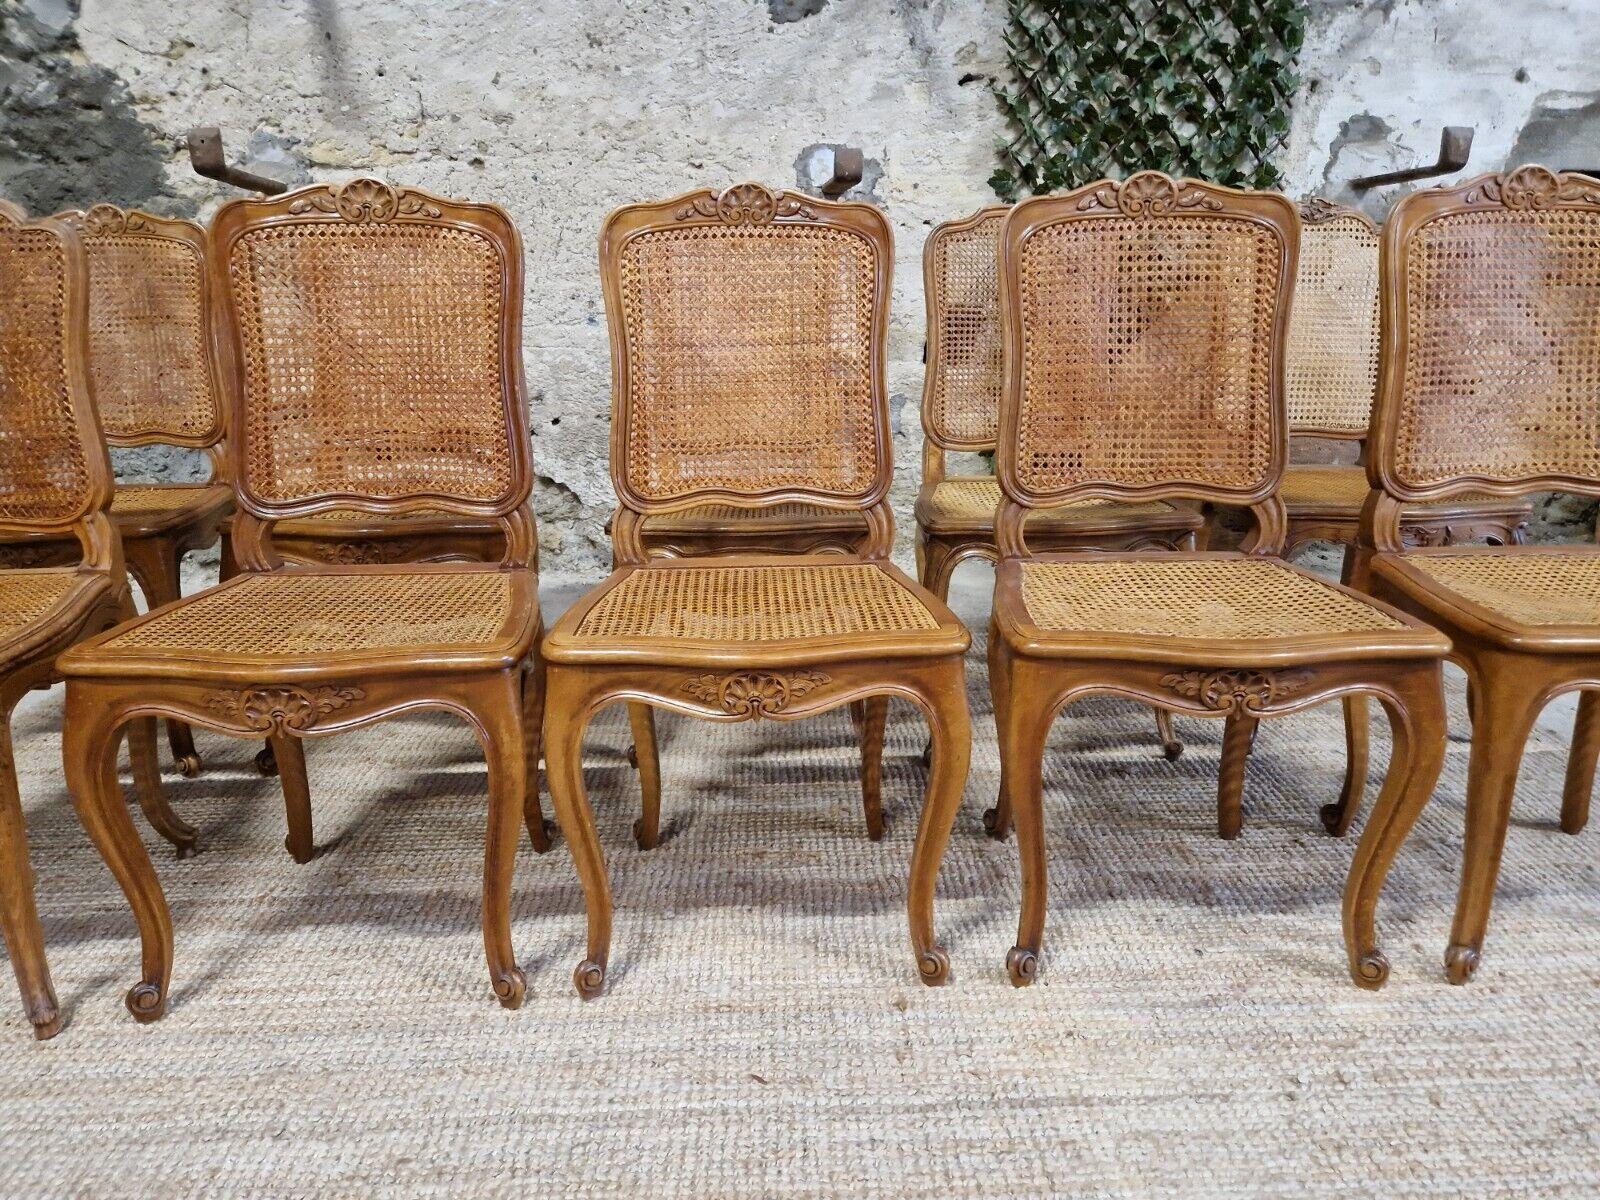 ROCAILLE ANTIQUES

This is a suite of 10 antique French cane dining chairs from the early 20th in the Louis xv style. The chairs are made of high-quality walnut wood and feature a beautiful Rocaille design. Each chair is fully assembled and has a